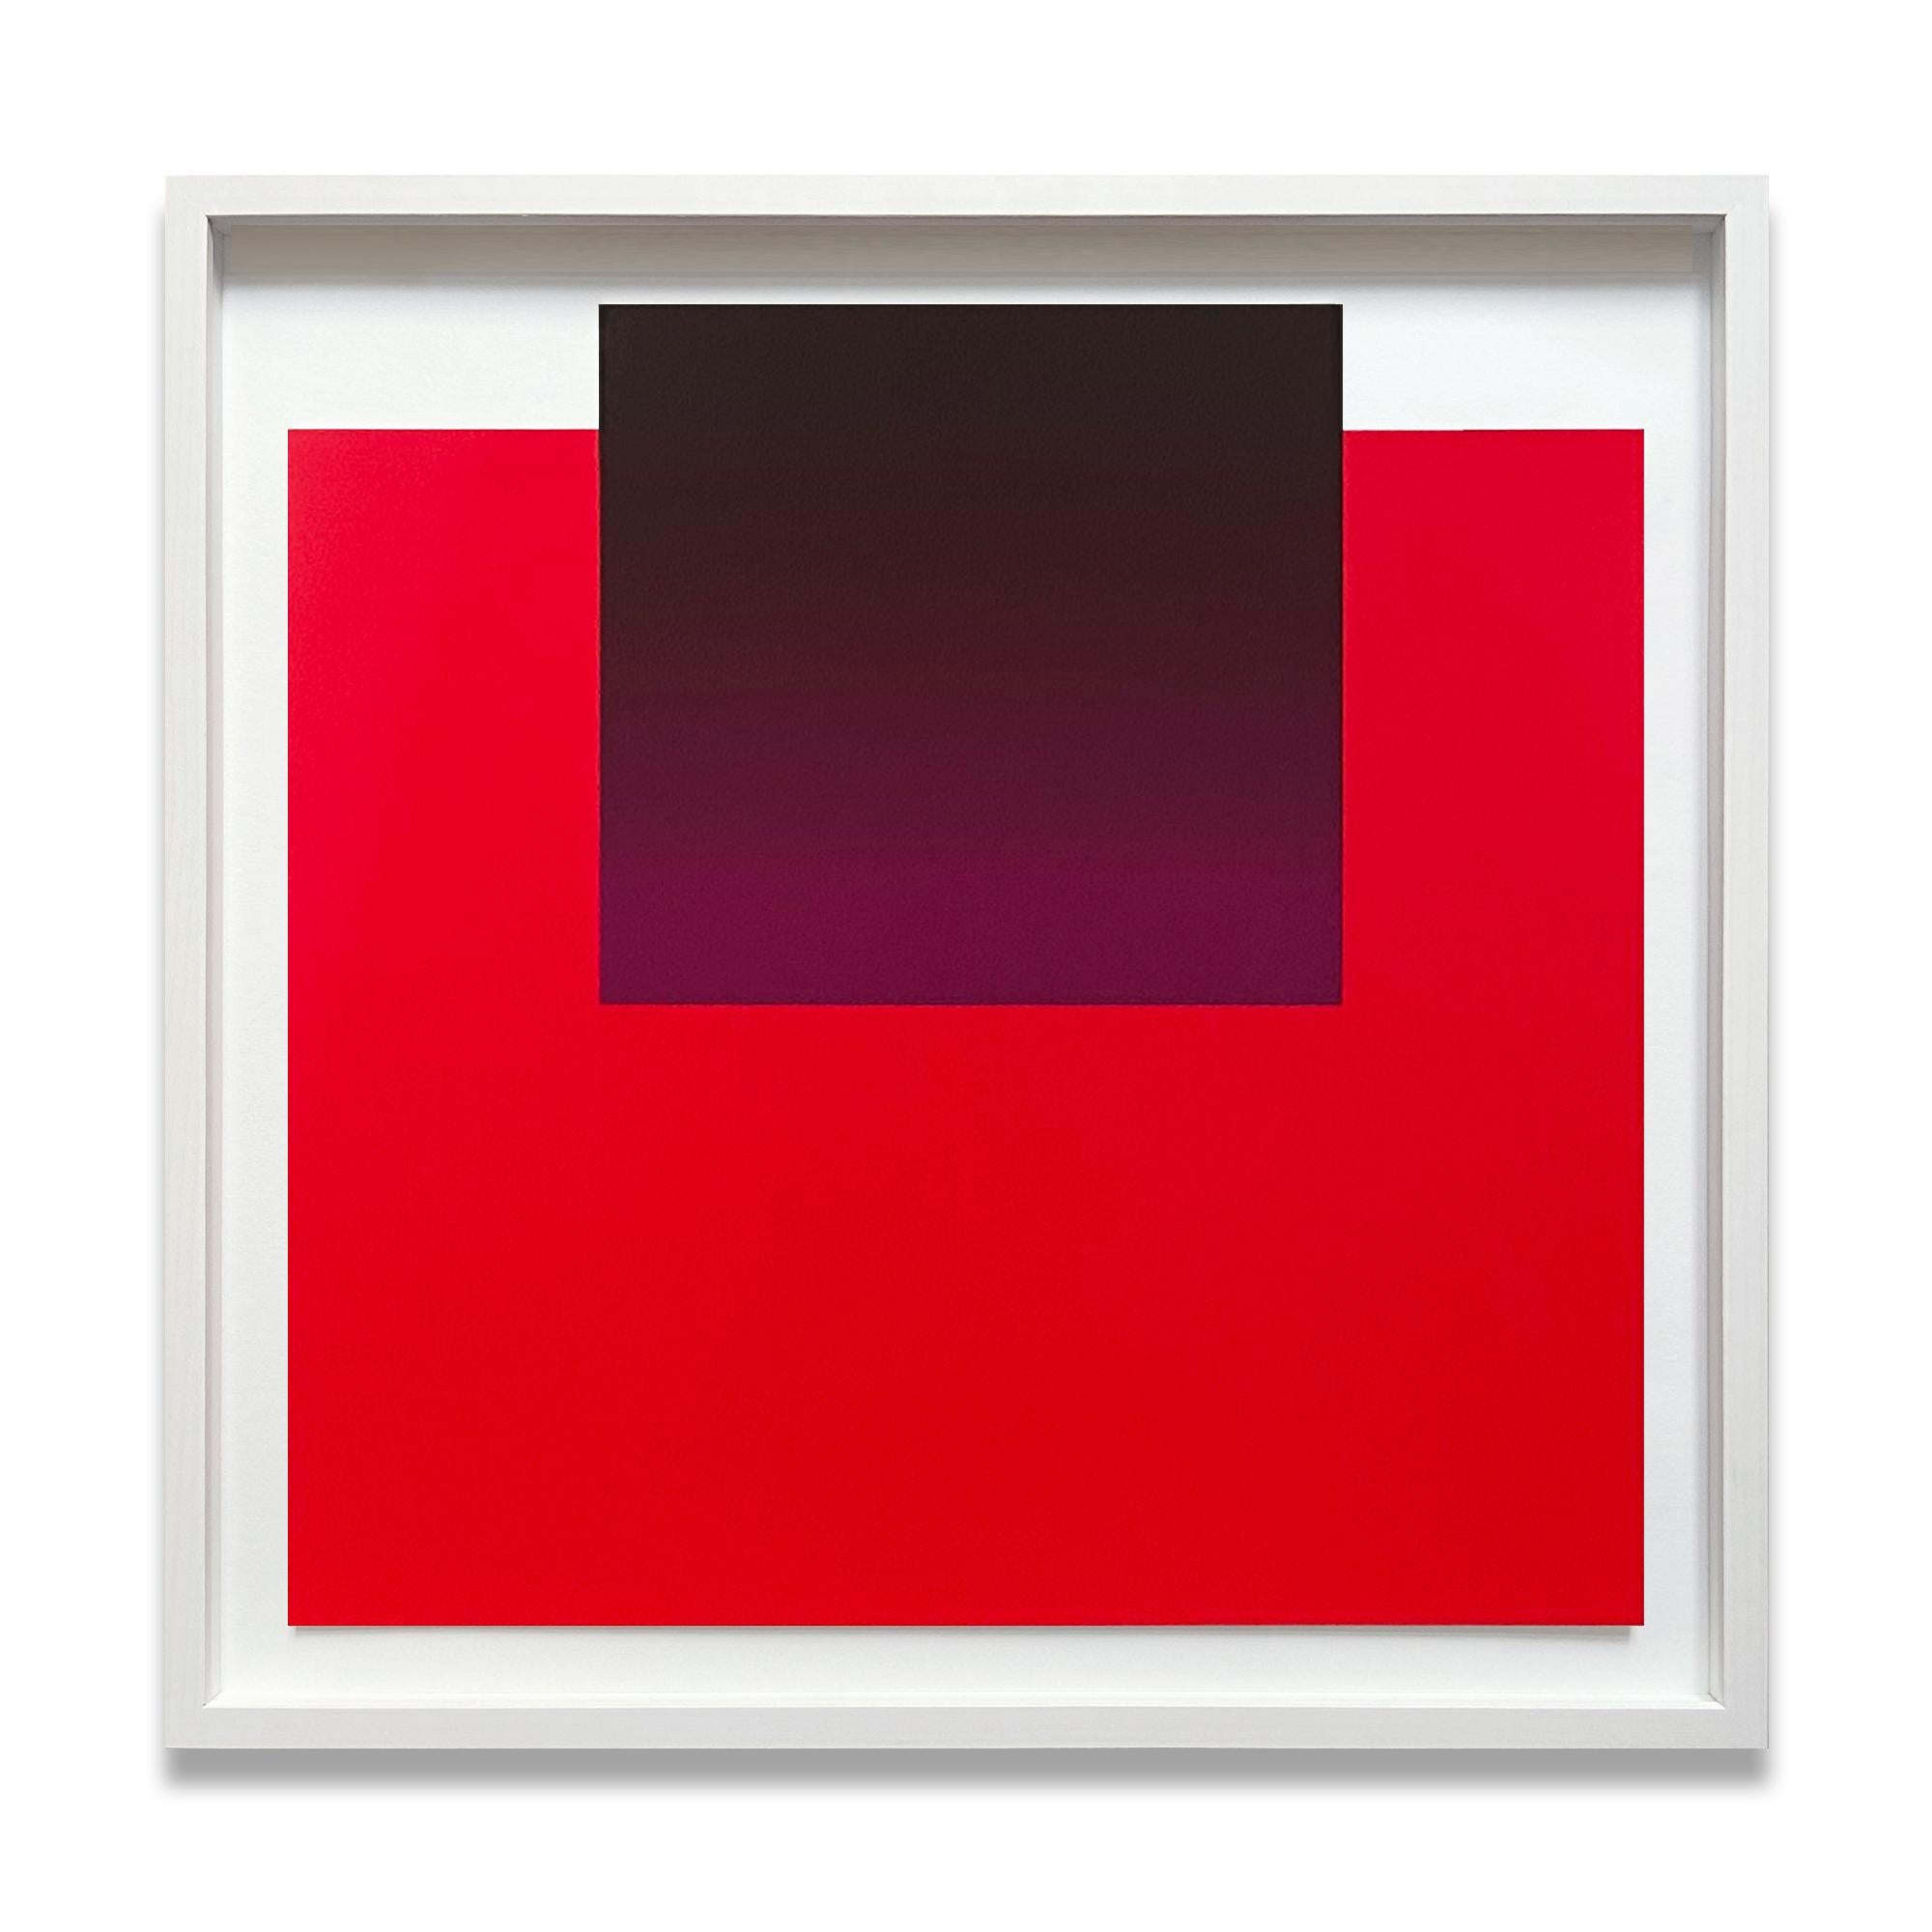 Rupprecht Geiger (German, 1908-2009)
Red on Violet (No. 2 from all die roten farben...), 1981
Medium: Screen print on cardboard, framed
Sheet dimensions: 39.5 x 40 cm
Frame dimensions: 46.1 x 46.6 cm
Edition of 100 + XX: Hand signed in pencil,